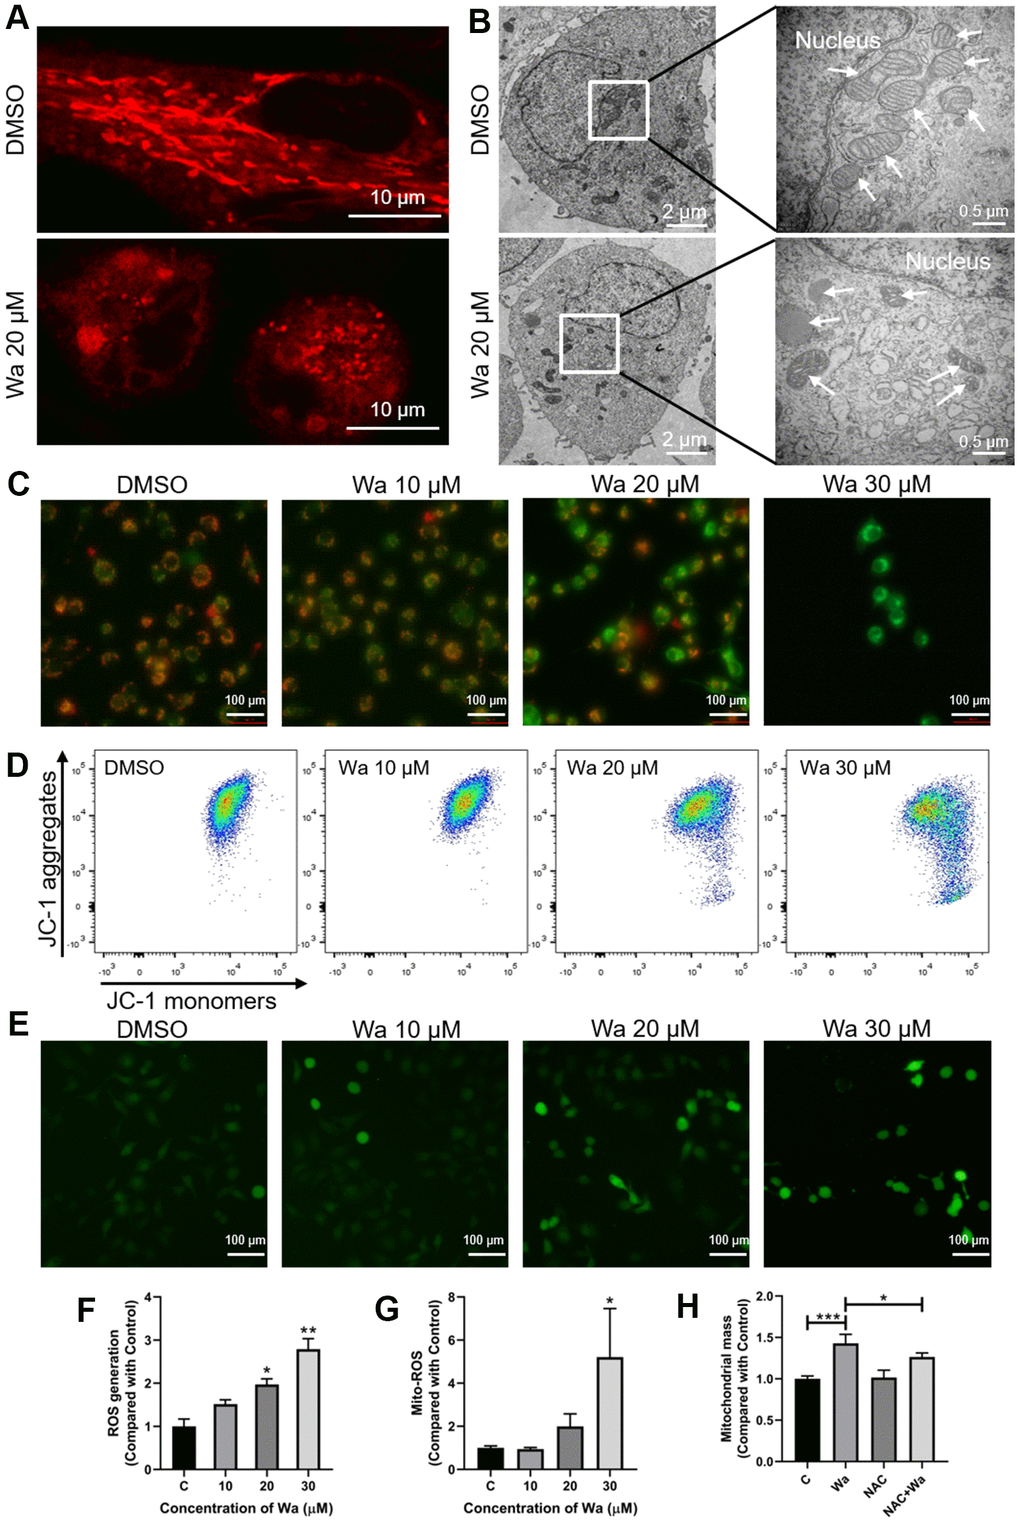 Warangalone causes to mitochondrial damage via ROS. (A, B) MDA-MB-231 cells were treated with 20 μM warangalone for 12 h. The mitochondria were stained with MitoTracker™ Red CMXRos 30 min, and observed by (A) confocal laser scanning microscopy (CLSM) (mitochondria emit red) and (B) transmission electron microscopy (TEM) (arrows mark mitochondria). (C, D) MDA-MB-231 cells were treated with the indicated concentrations of warangalone for 12 h. Fluorescence microscopy (C) and flow cytometry (D) were used to detect the mitochondrial membrane potential. JC-1 aggregates emit orange, and JC-1 monomers emit green. (e-g) MDA-MB-231 cells were treated with the indicated concentrations of warangalone for 12 h. Whole cell ROS was detected through fluorescence microscope (E) and fluorescence spectrophotometry (F). ROS labeled with DCFH-DA emit green (E). MitoSOX was used to specifically detect mitochondrial superoxides through flow cytometry (G). (H) MDA-MB-231 cells were pretreated with NAC (5 mM) for 1 h, and cultured with warangalone (20 μM) for 12 h. The mitochondria were stained with MitoTrackerTM Red CMXRos for 30 min and flow cytometry was used to detect mitochondrial mass. One-way ANOVA was used for statistical analysis (n ≥ 3). *P 